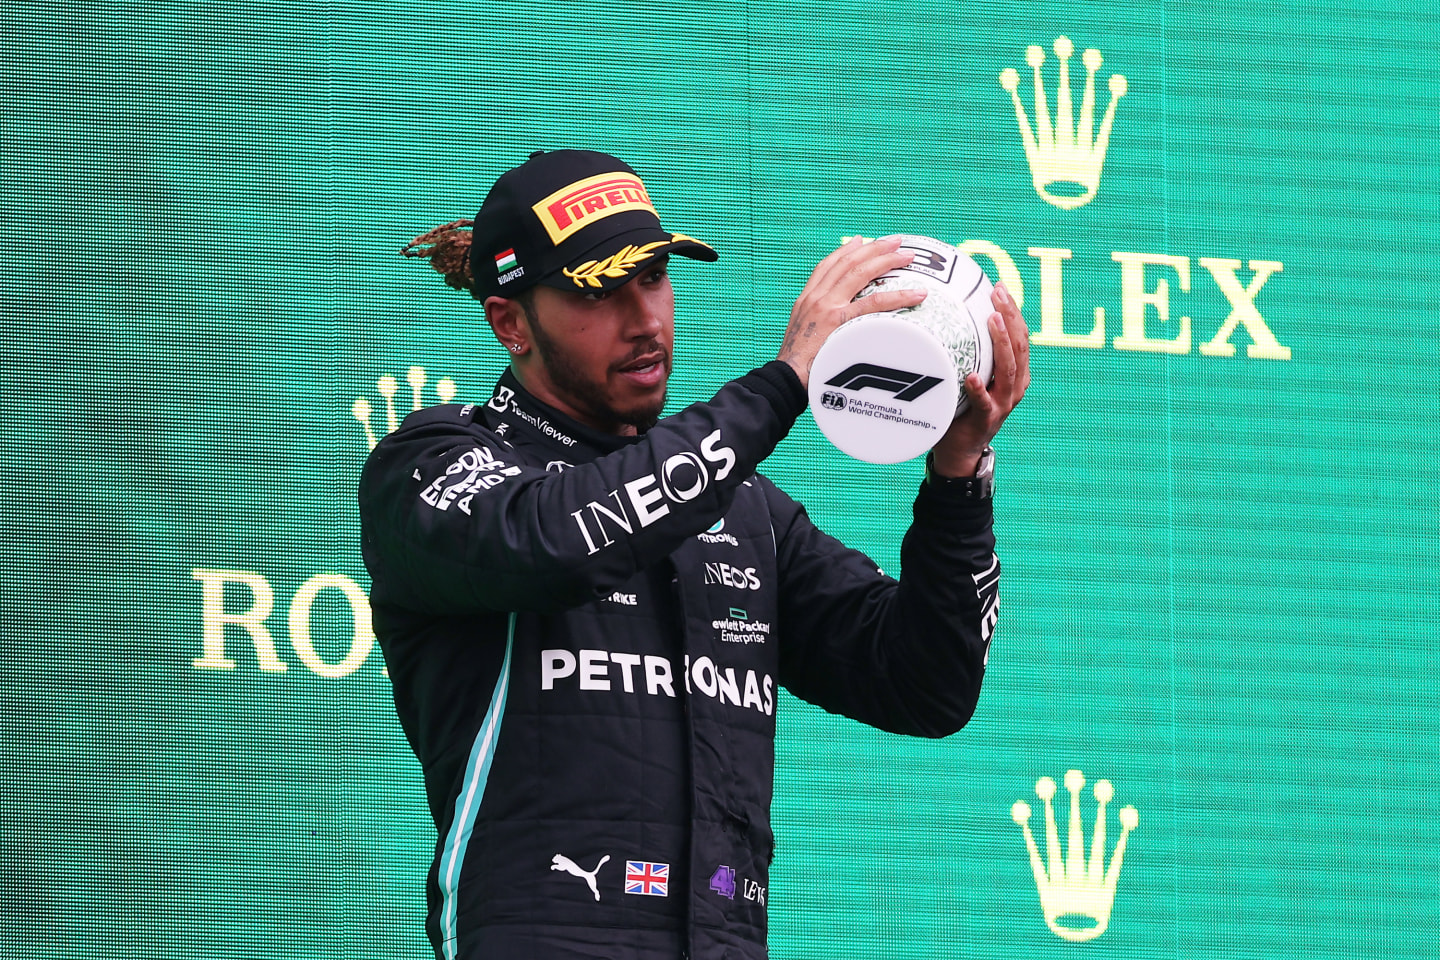 BUDAPEST, HUNGARY - AUGUST 01: Third placed Lewis Hamilton of Great Britain and Mercedes GP celebrates on the podium during the F1 Grand Prix of Hungary at Hungaroring on August 01, 2021 in Budapest, Hungary. (Photo by Lars Baron/Getty Images)